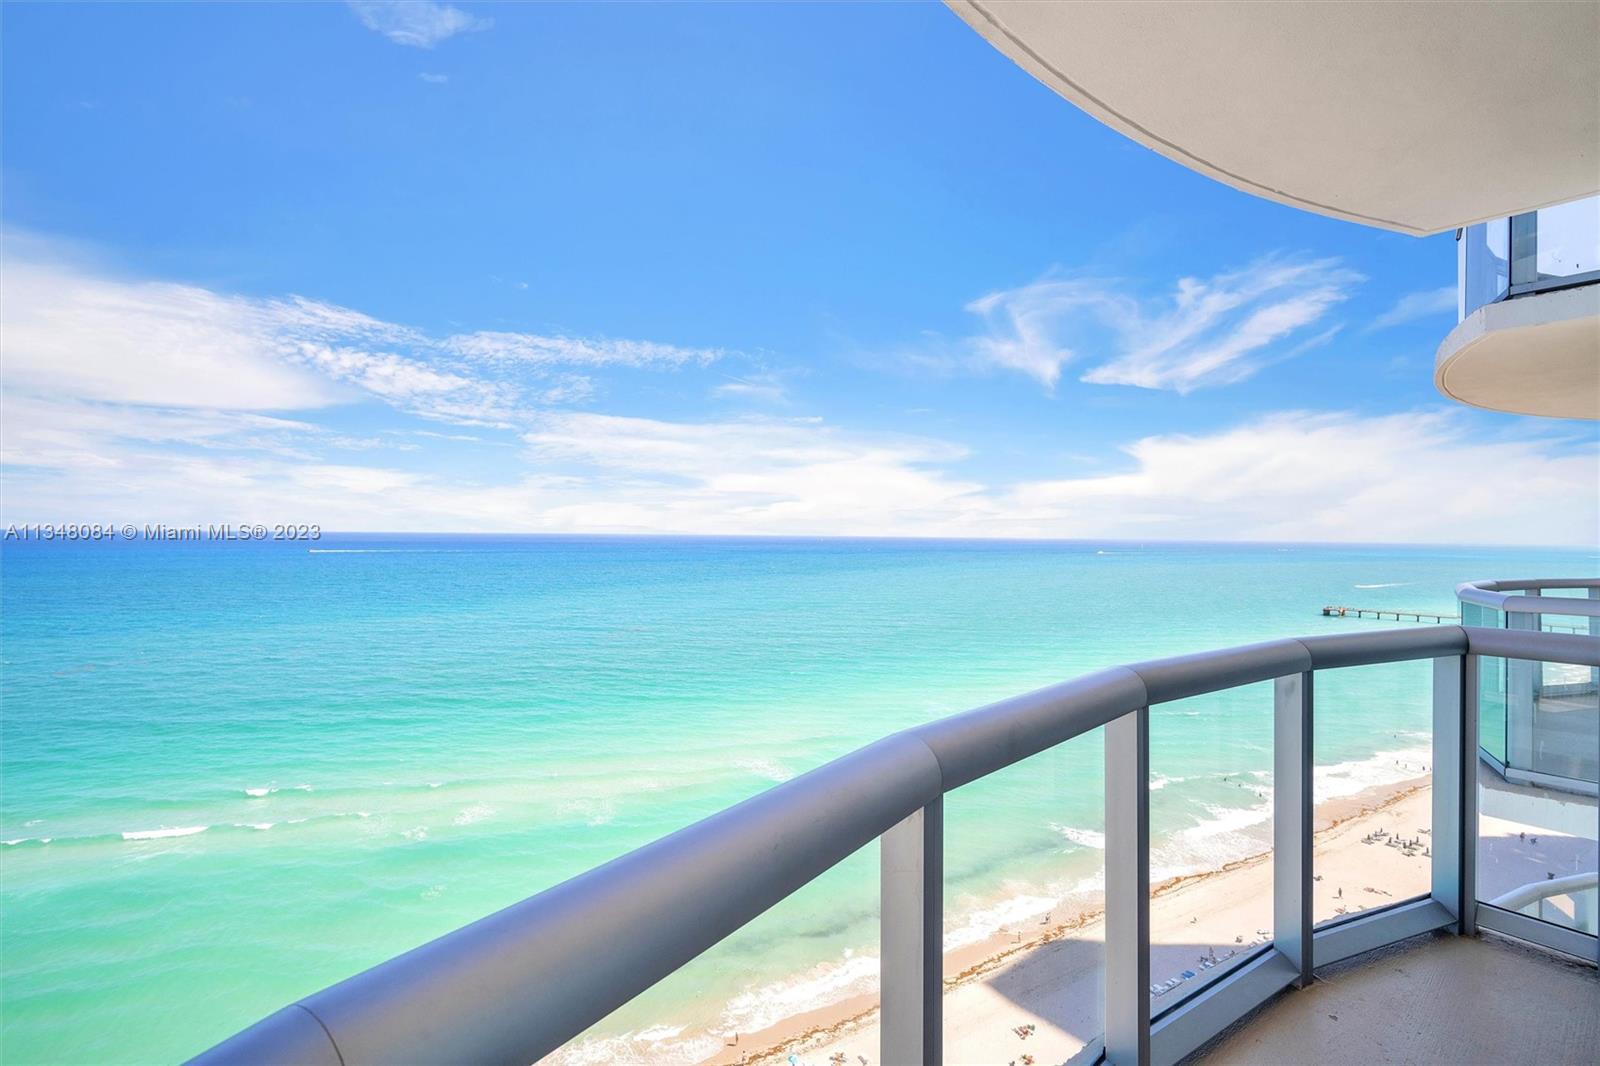 Million Dollar Views **DIRECT OCEAN FRONT CORNER the Best Views & Location. This amazing unit is 2 b